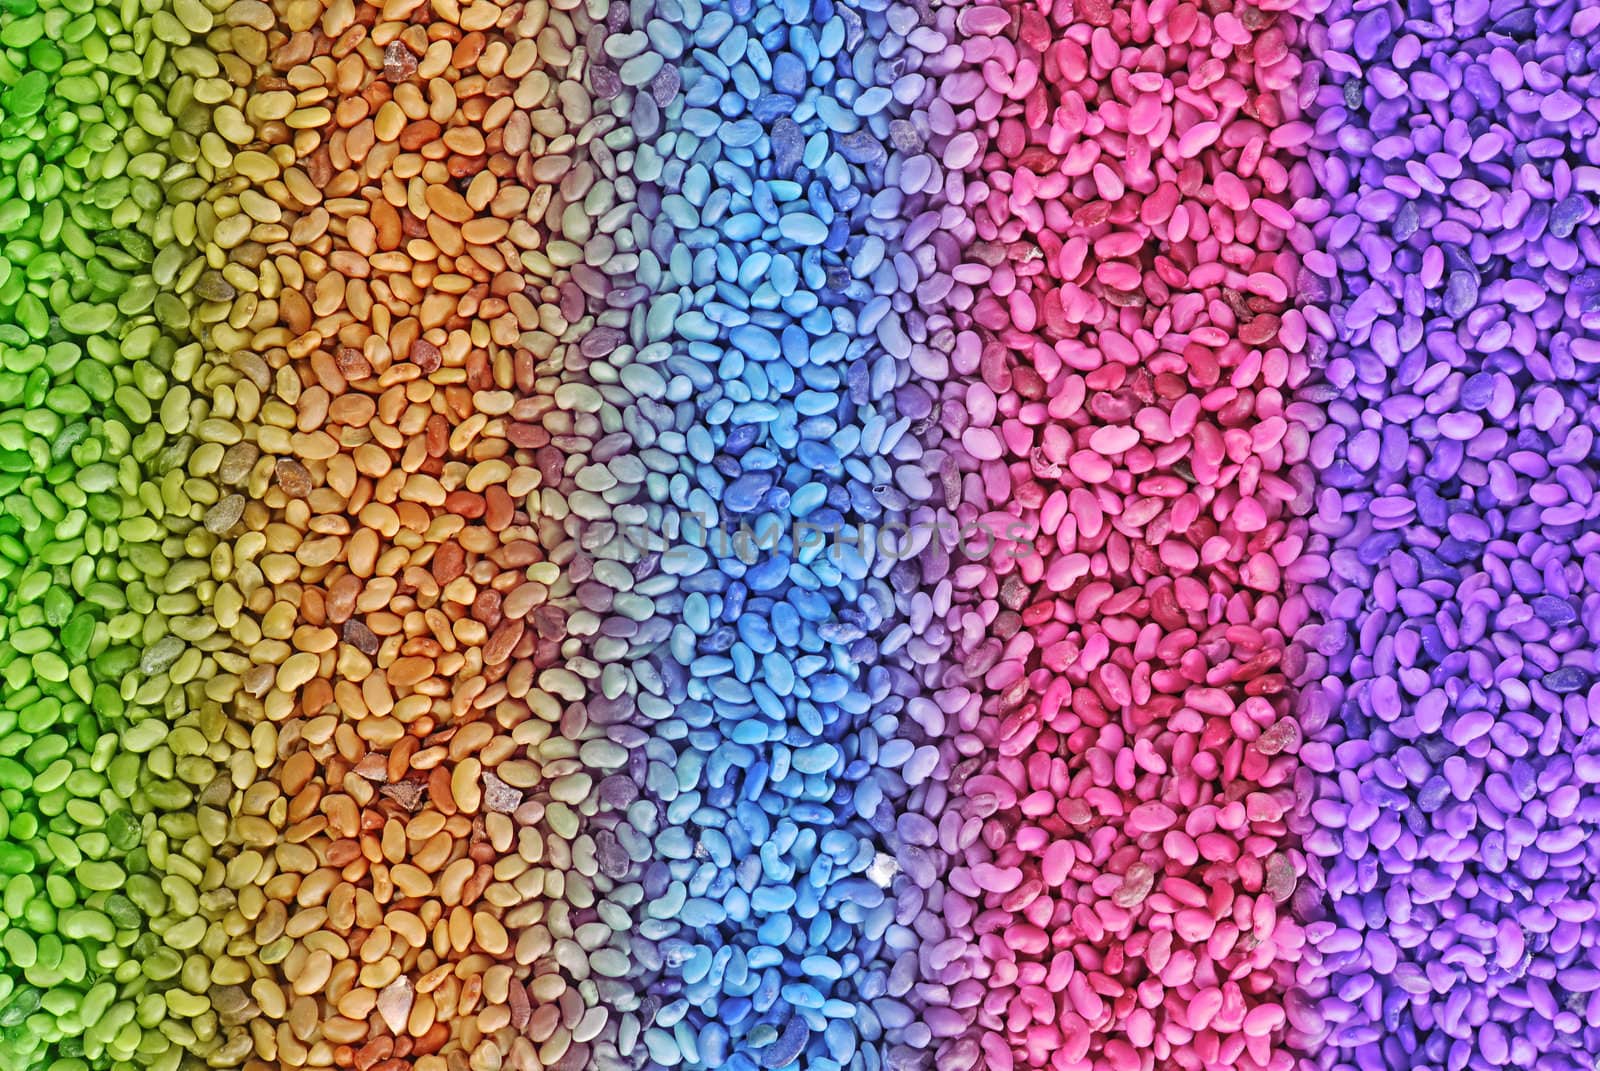 Colorful seeds in close-up